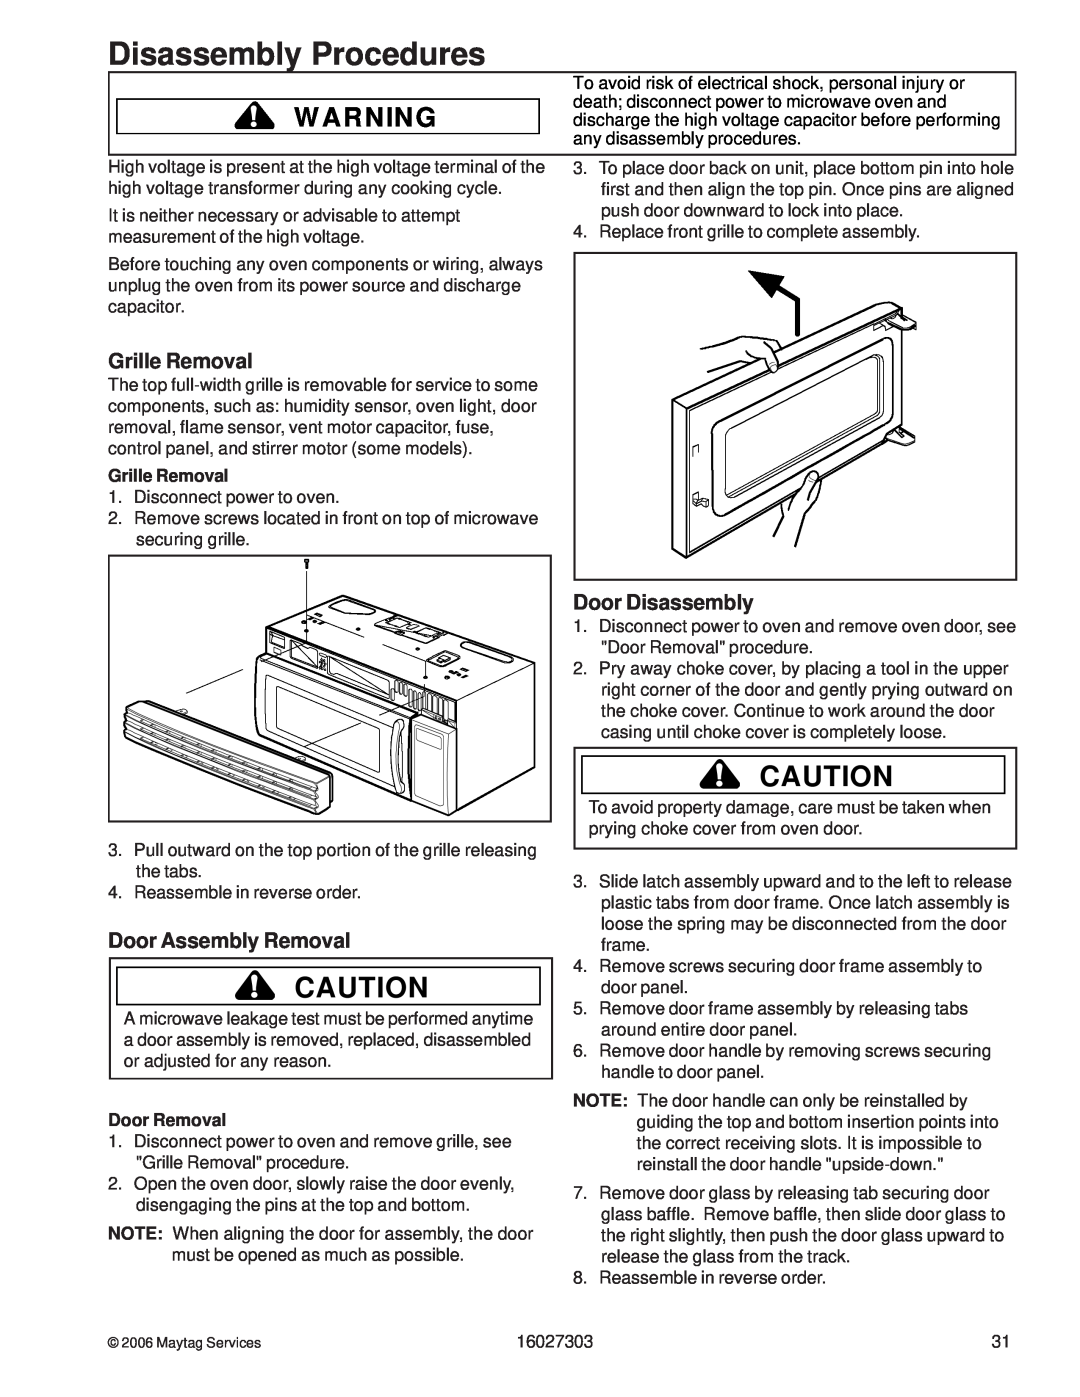 Maytag UMV1152CA manual Disassembly Procedures, Grille Removal, Door Assembly Removal, Door Disassembly, Door Removal 